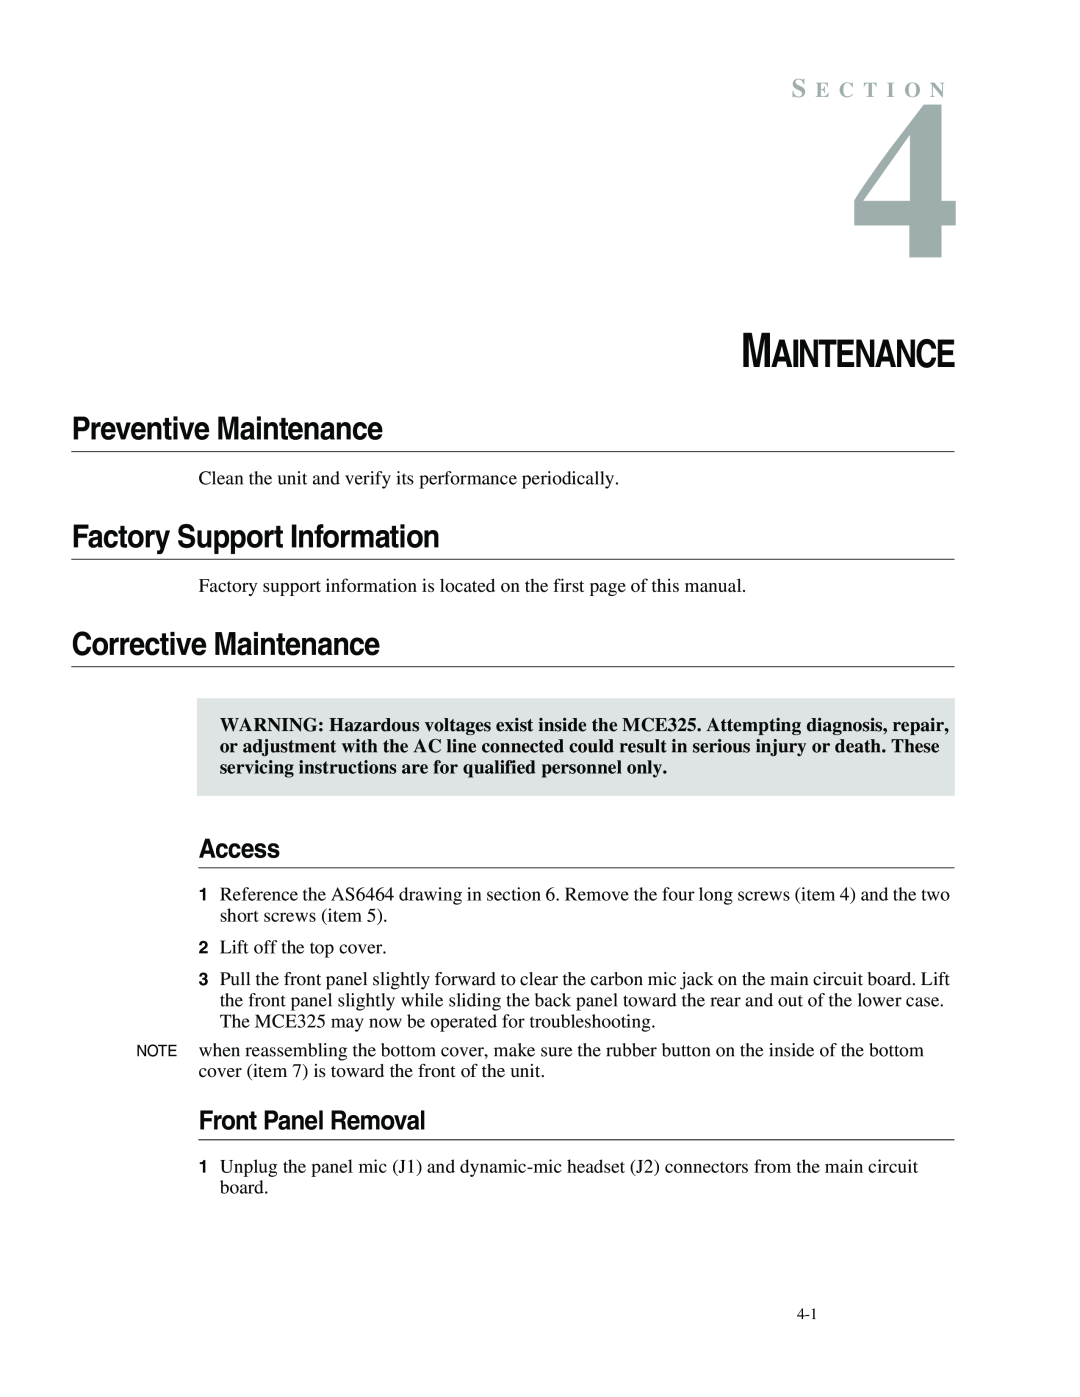 Telex MCE325 Preventive Maintenance, Factory Support Information, Corrective Maintenance, Access, Front Panel Removal 